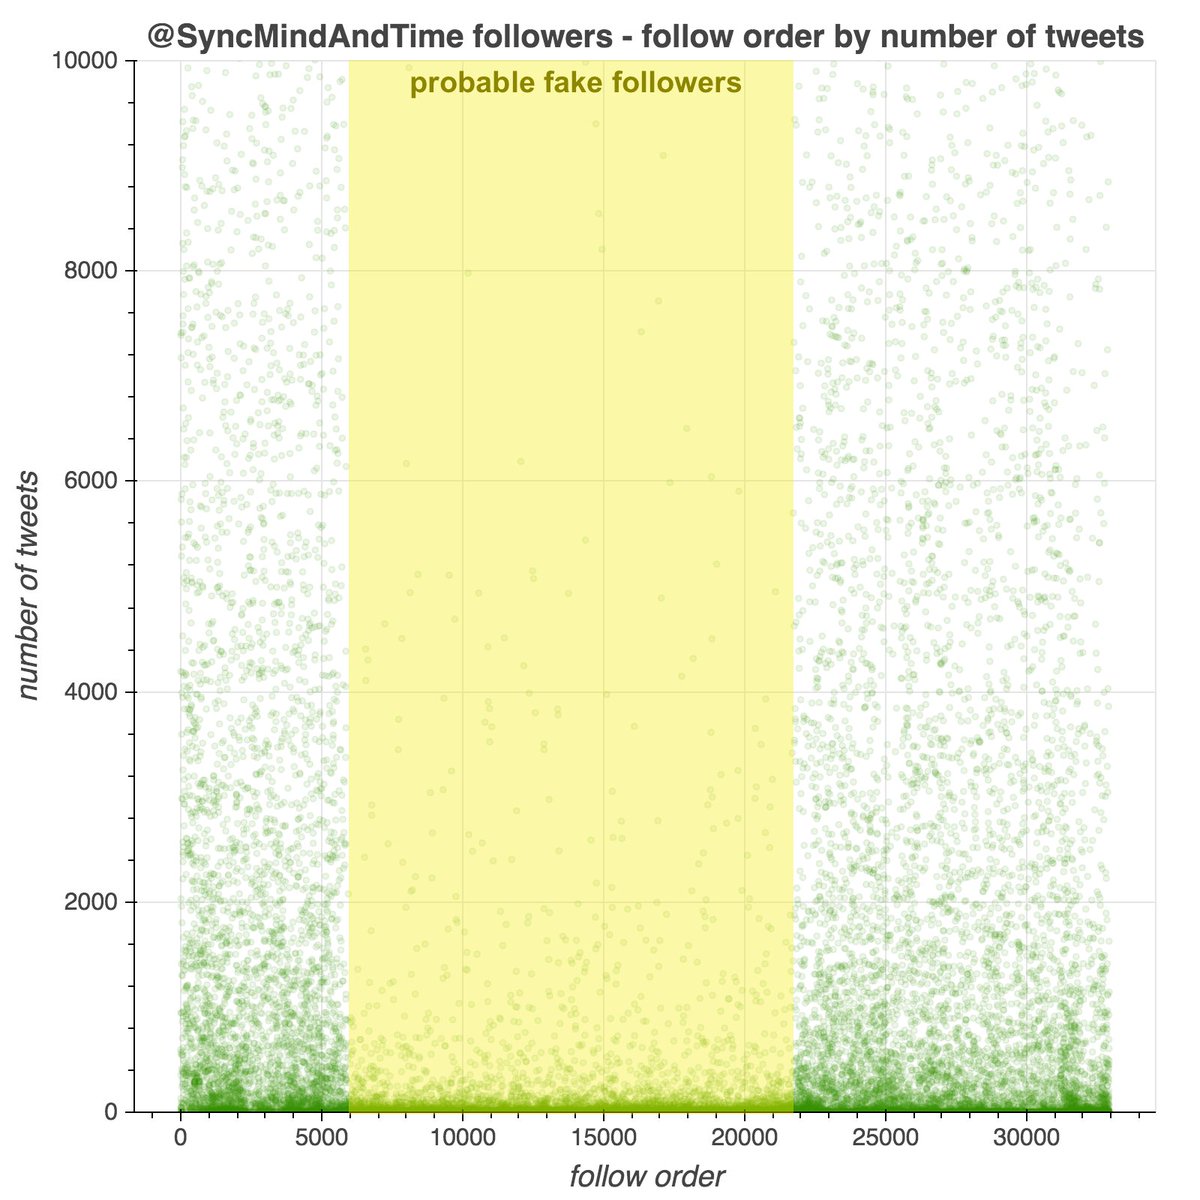 If you've got a little more cash to throw around, you could pick up  @SyncMindAndTime (permanent ID 1346590724) for $200. Don't get too excited about the 33K followers, though - half of them are probably fake, between patterns in creation dates and utter lack of tweets.